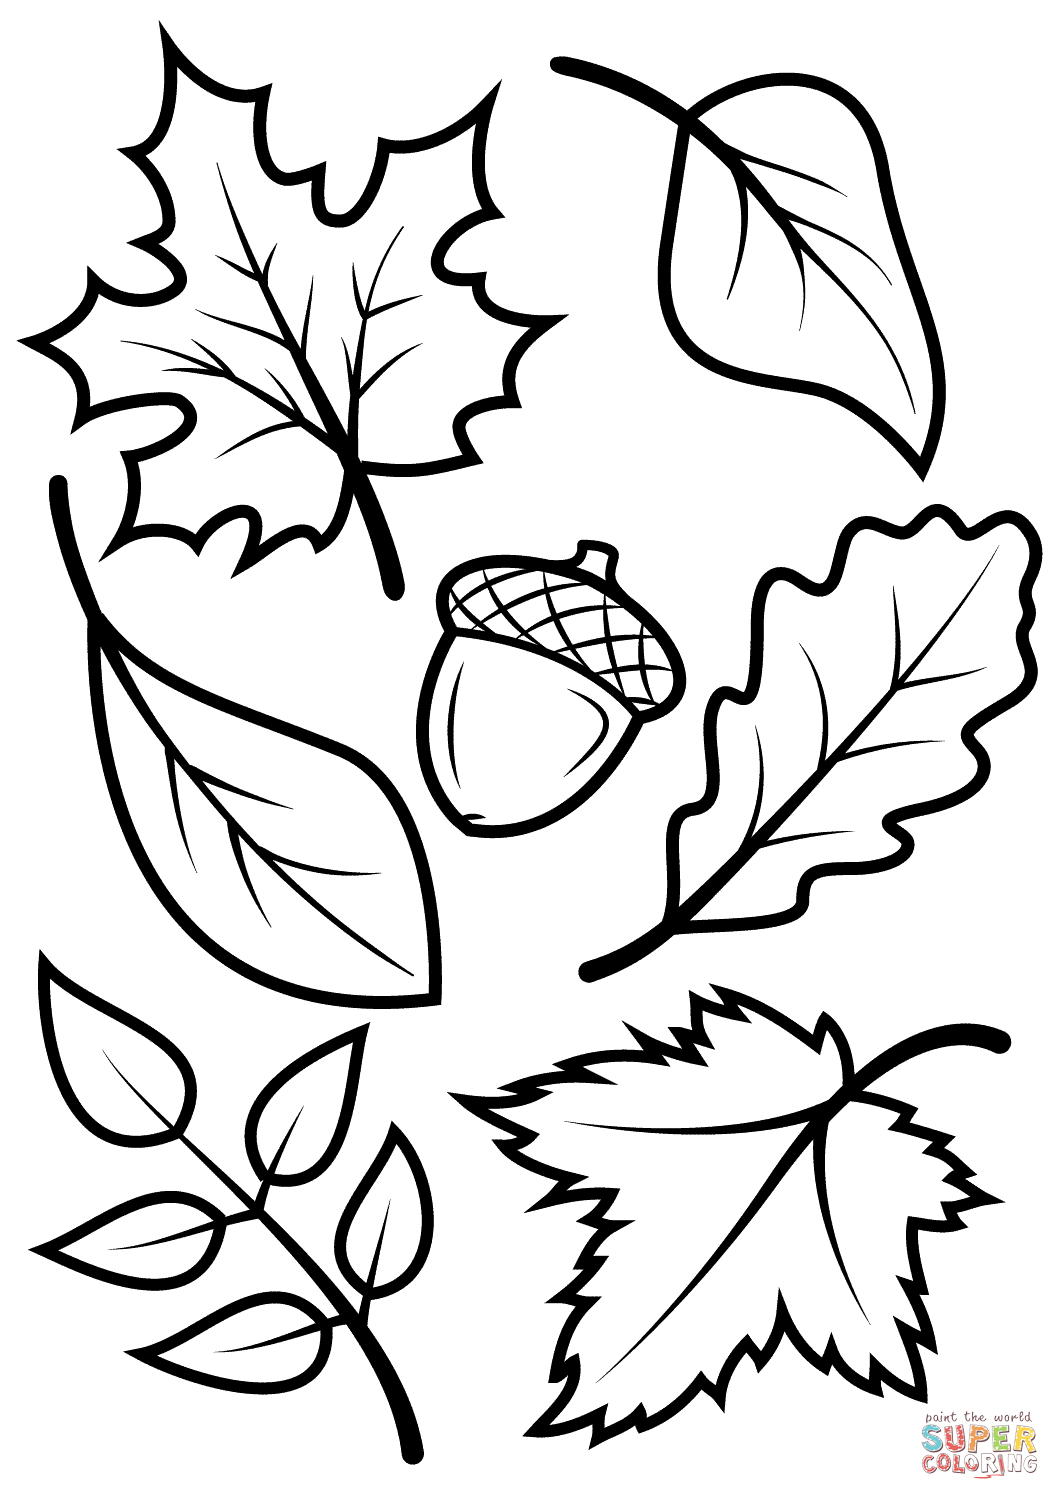 Free Coloring Pages Of Leaves Fall Leaves And Acorn Coloring Page Free Printable Coloring Pages